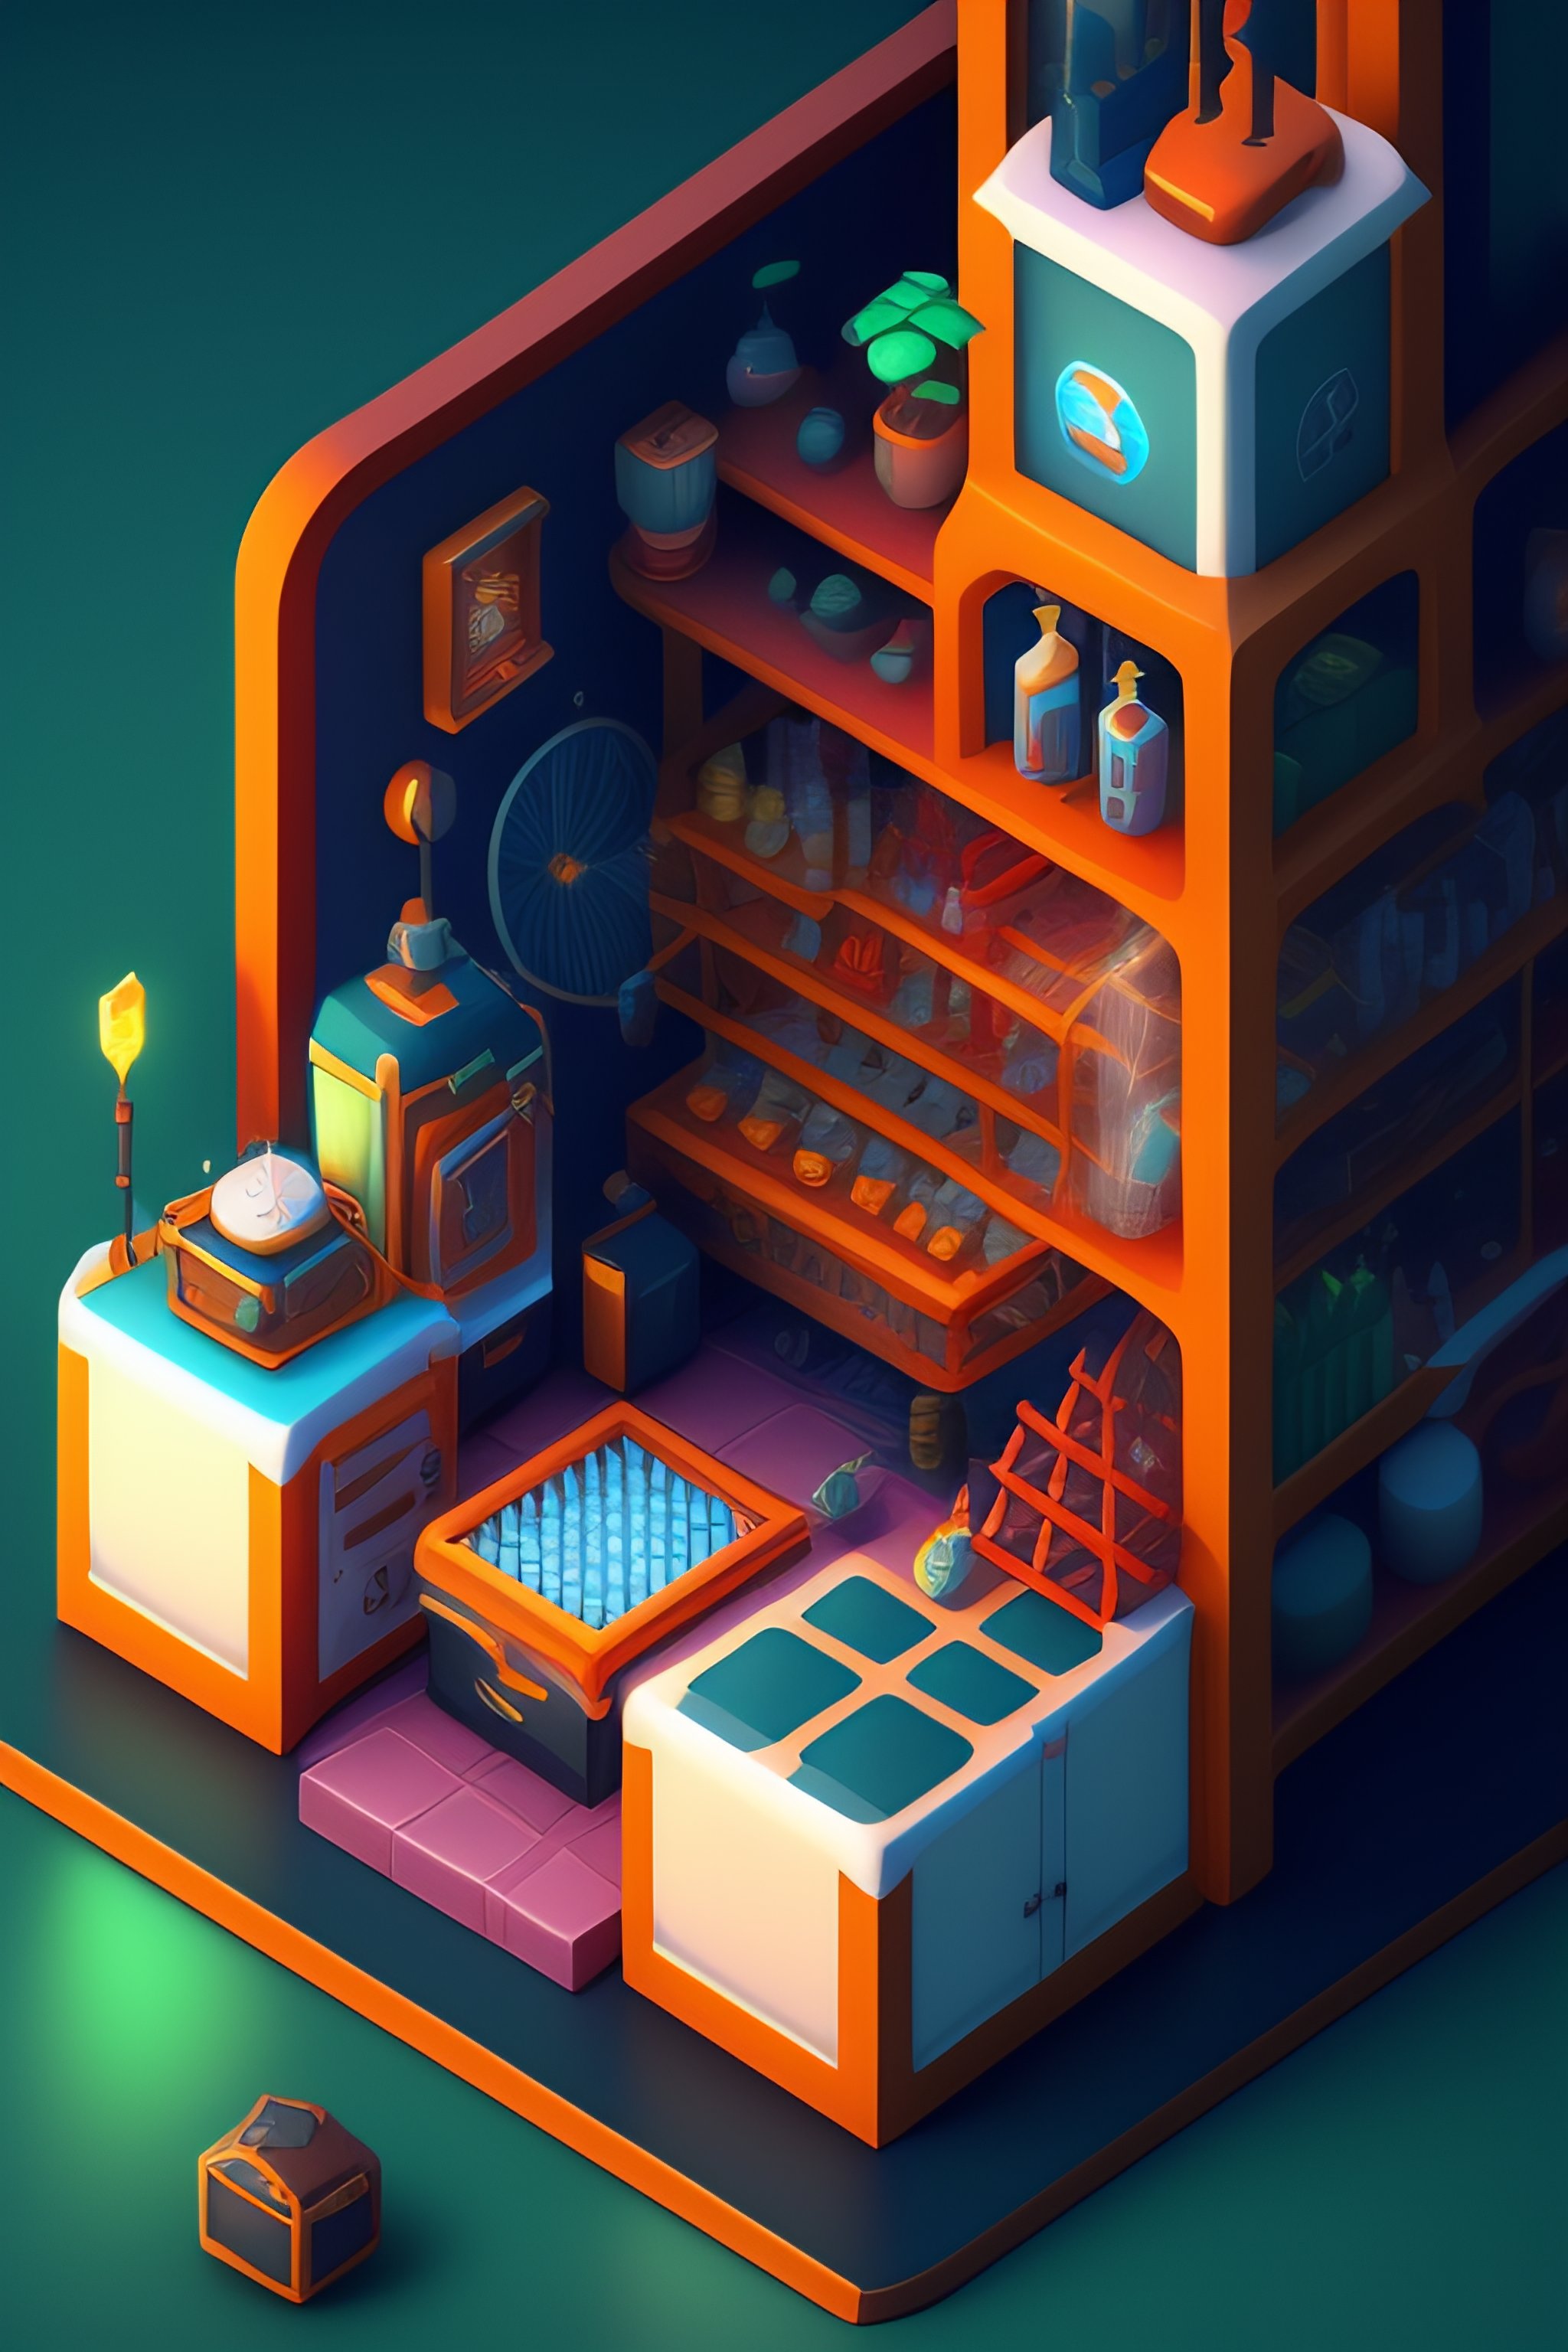 Lexica Isometric Mad Laboratory Concept Art By Senior Environment Artist Featured On 2846